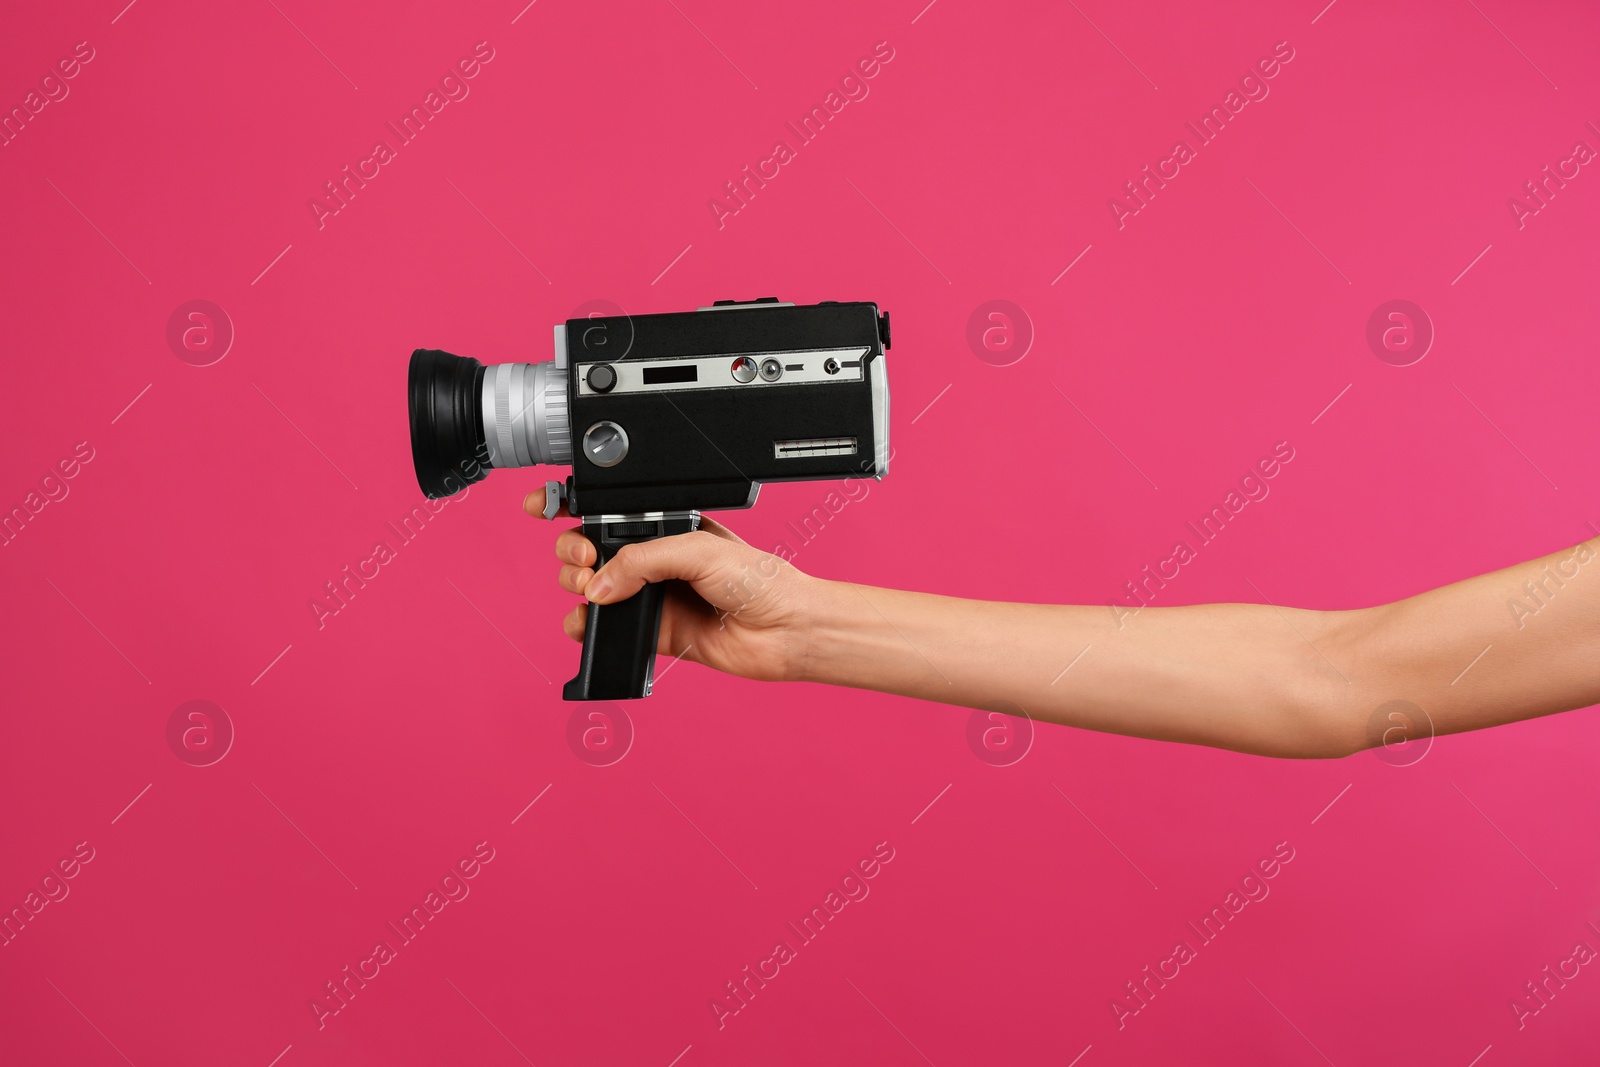 Photo of Woman with vintage video camera on crimson background, closeup of hand